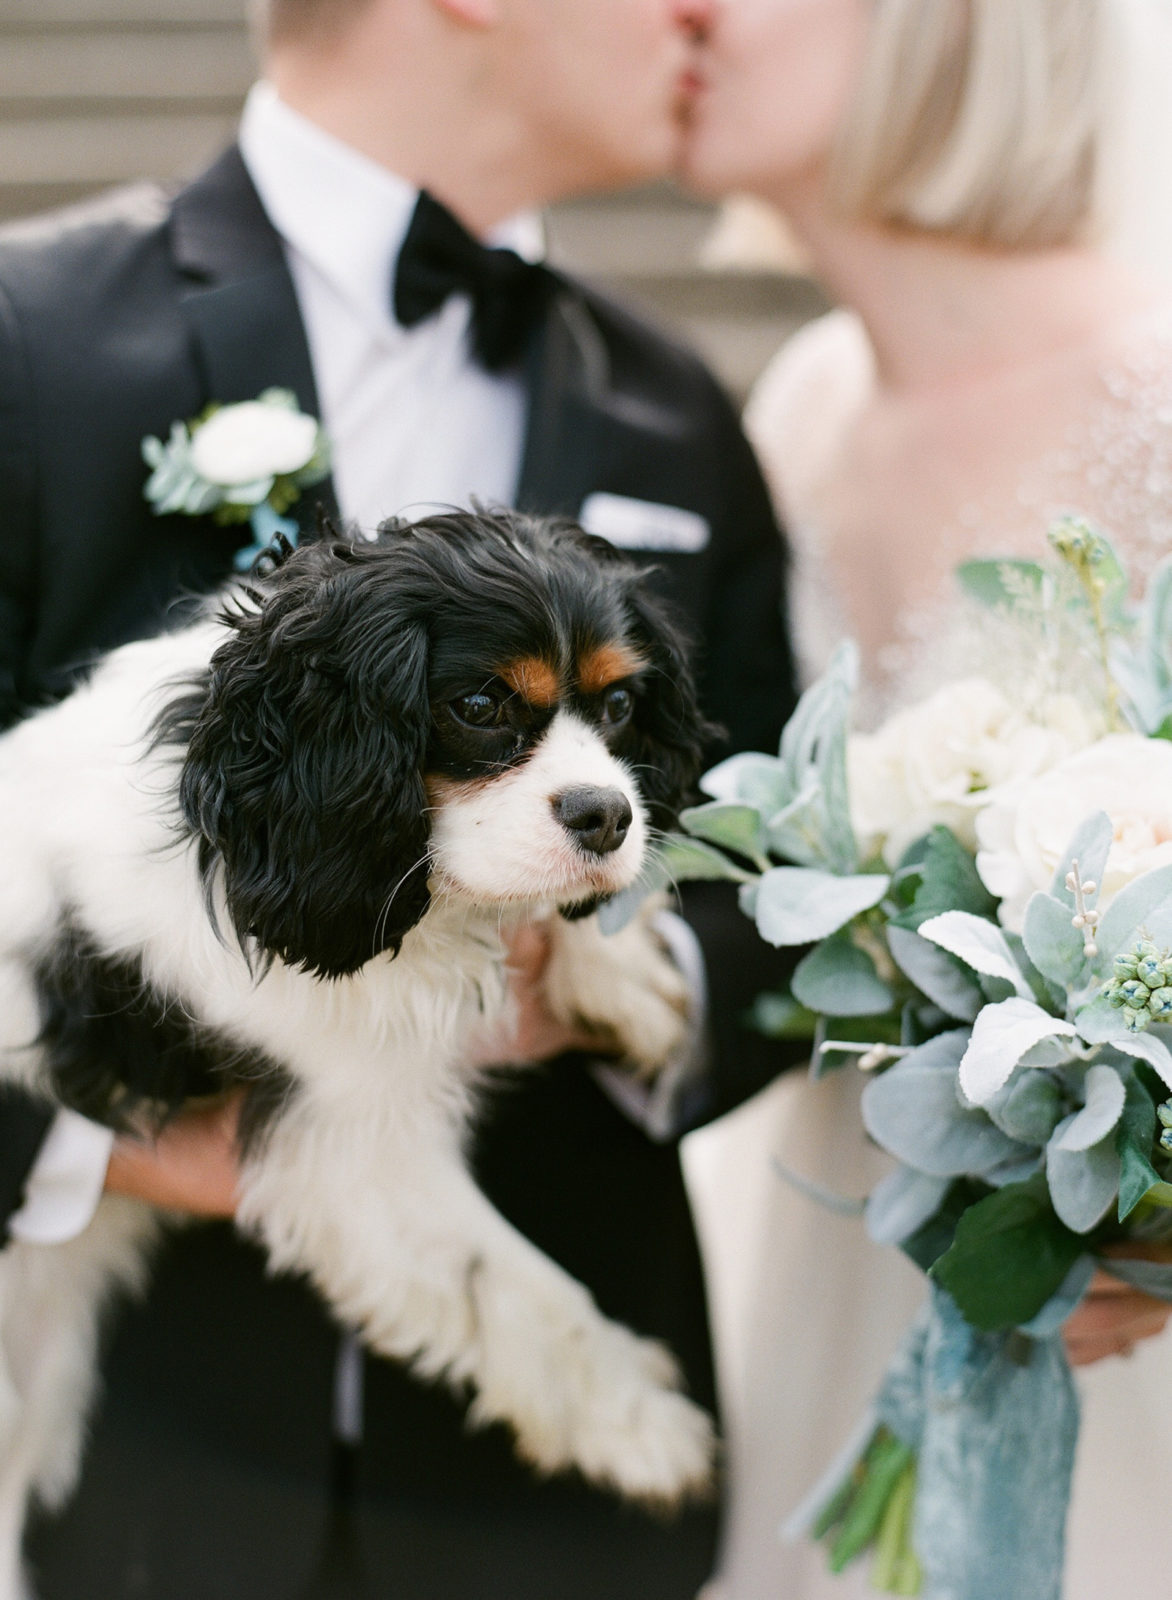 Laurel Hall Wedding Photographer | Estate Wedding Venue | Midwest Film Photographer | Molly Carr Photography | Bride and Groom Photos with Dog King Charles Cavalier Spaniel